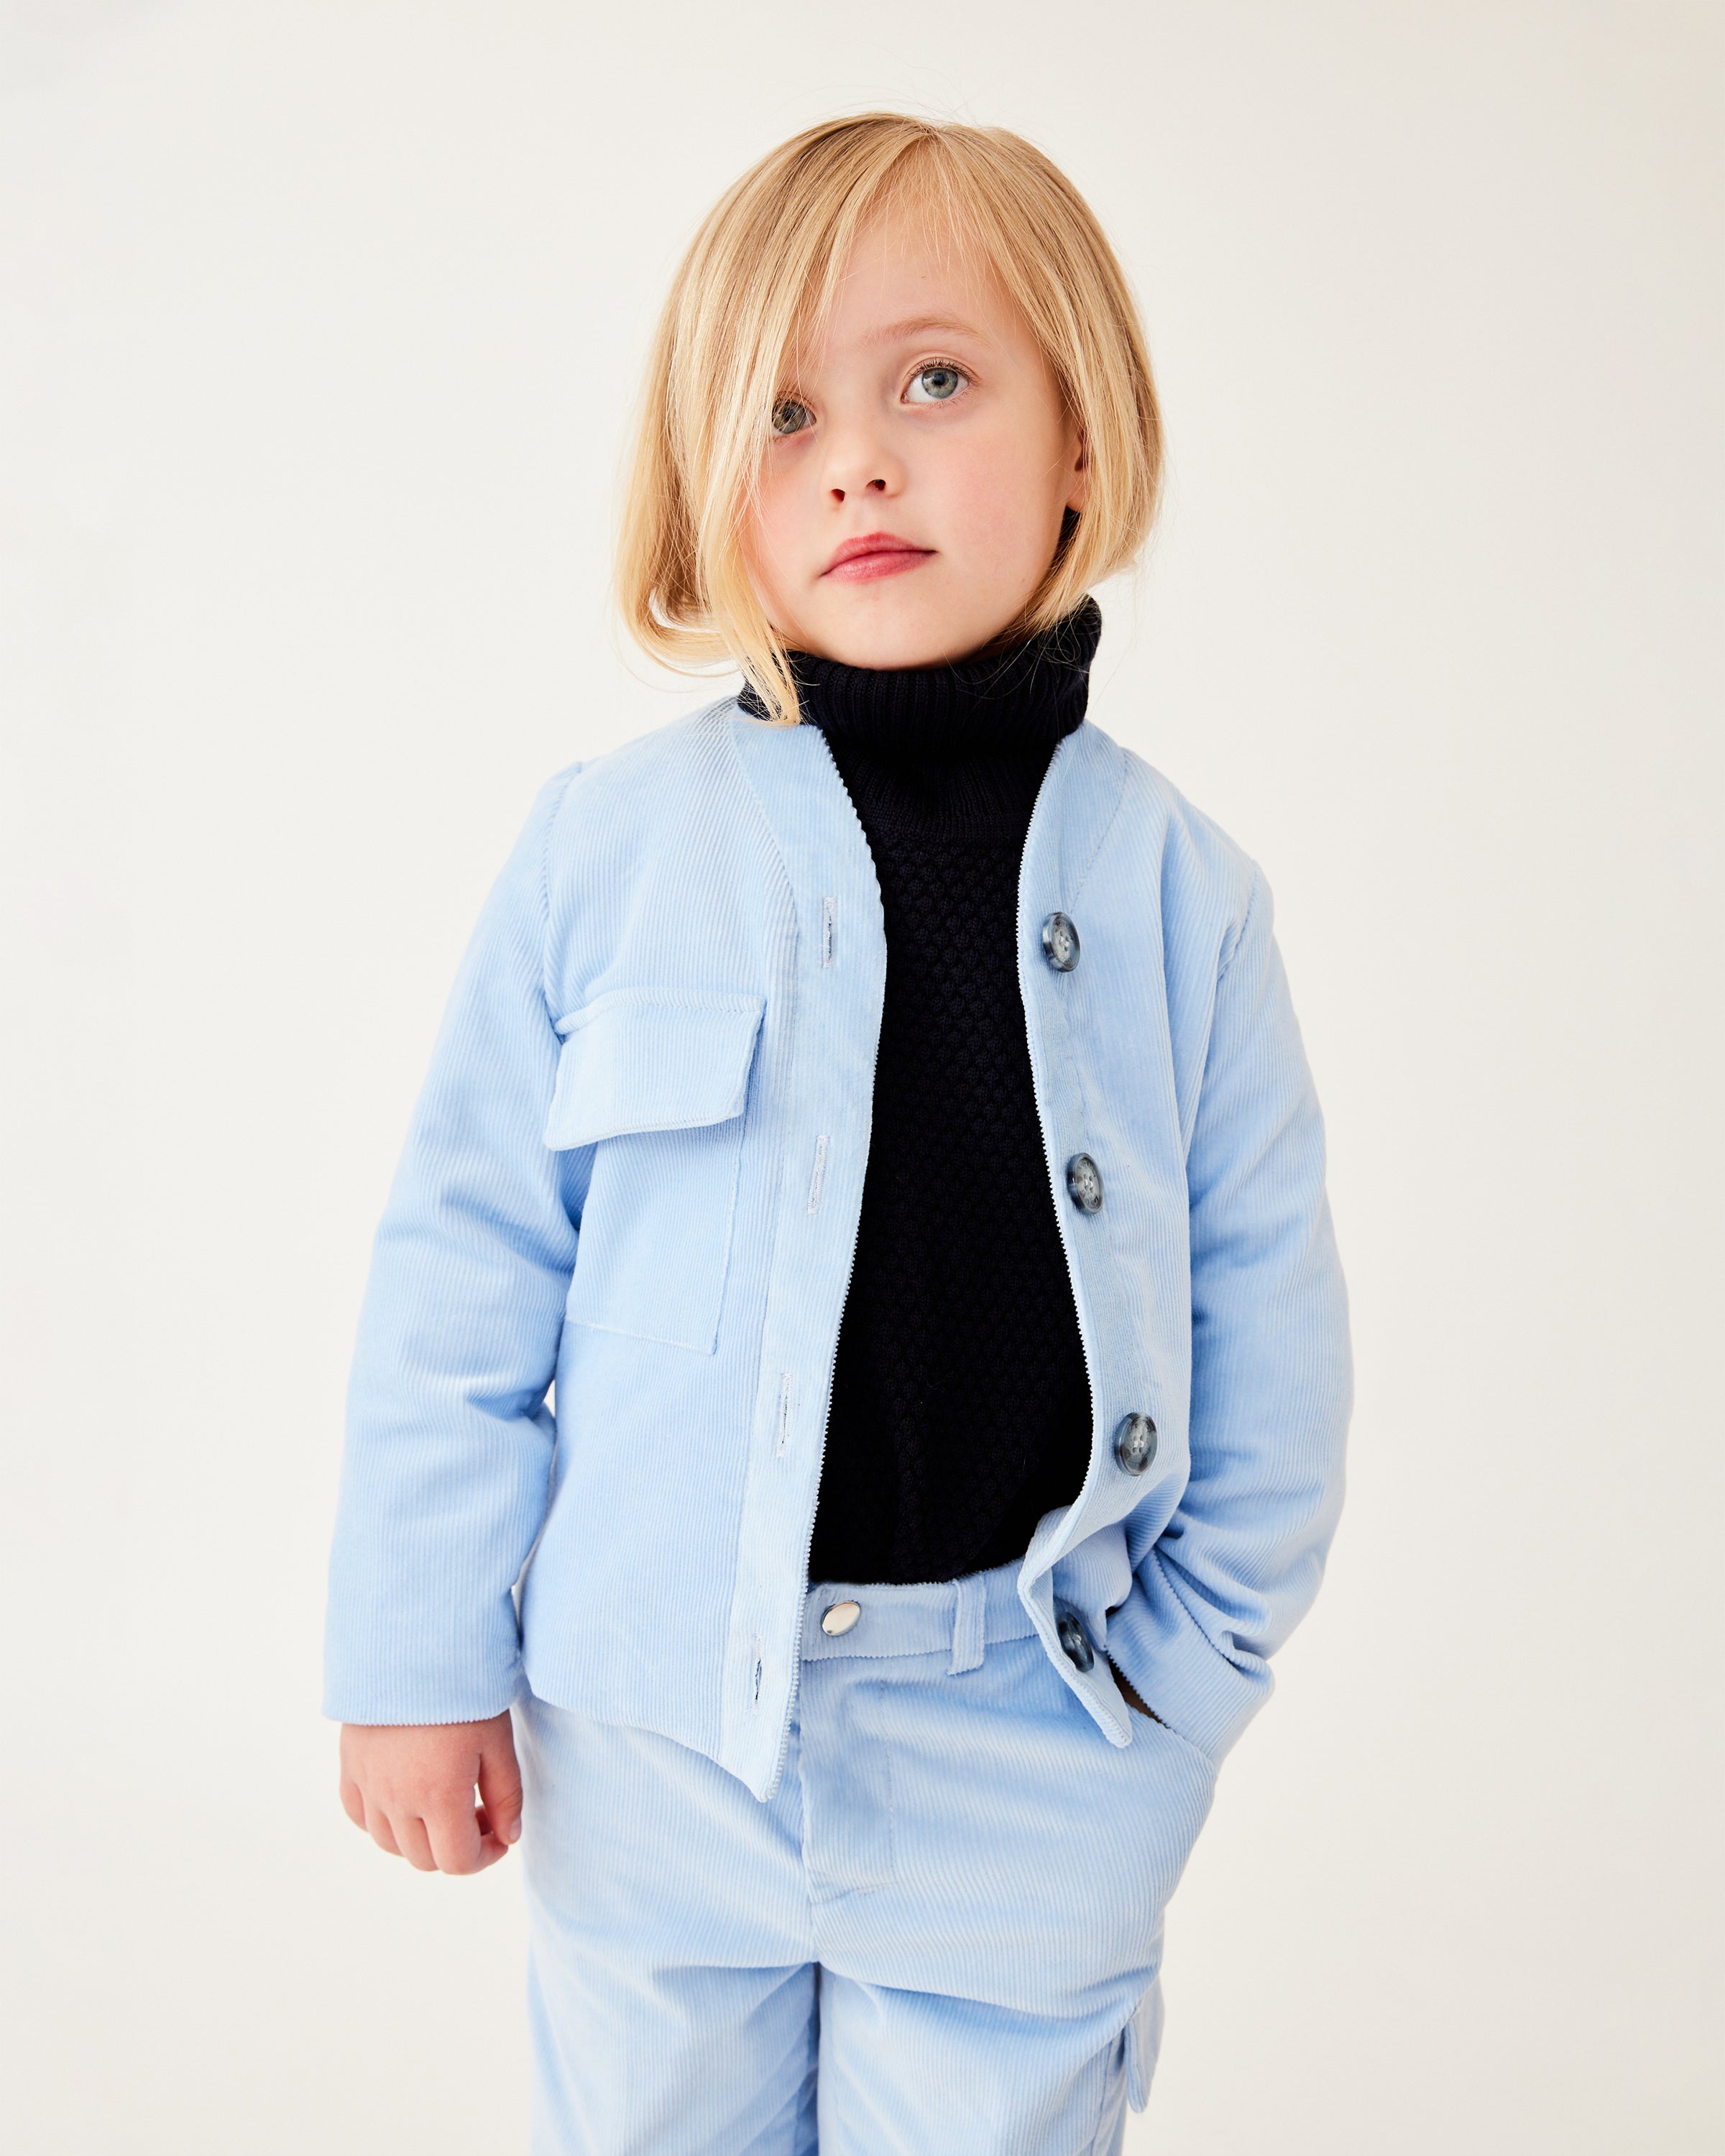 An exclusive line with limited editions proposed by Kelly Kilby for her first kidswear collection for Autumn Winter 2022/2023. Designed for boys and girls between 4 and 10, this genderless collection has been created in order to pay homage to the school outfit, with a modern and timeless cut.